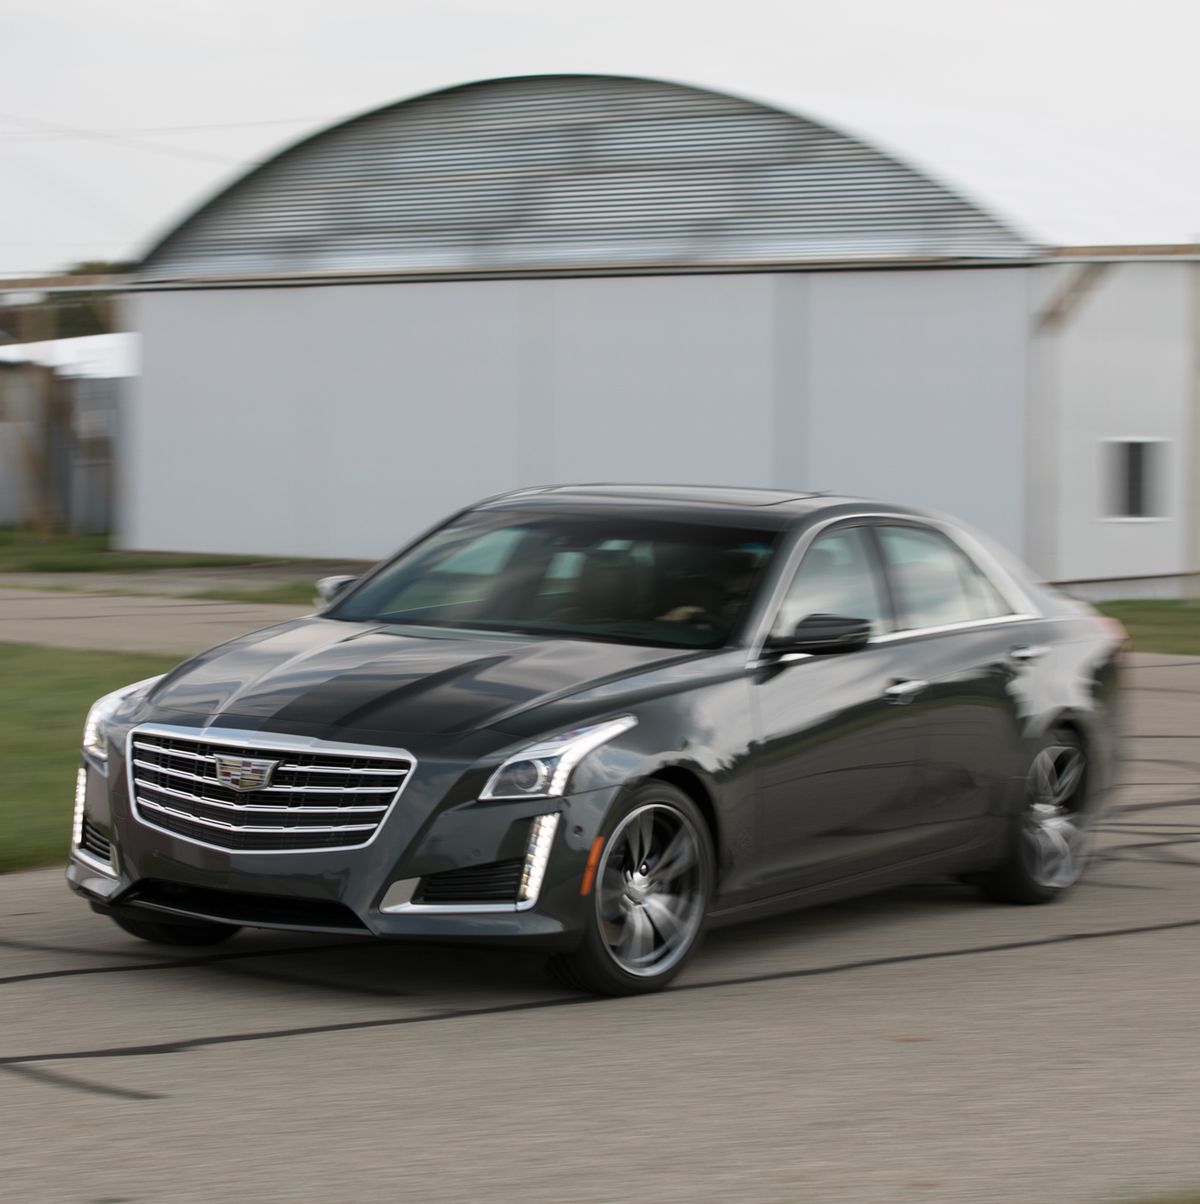 Tested: 2017 Cadillac CTS 3.6L RWD Hits the Sweet Spot